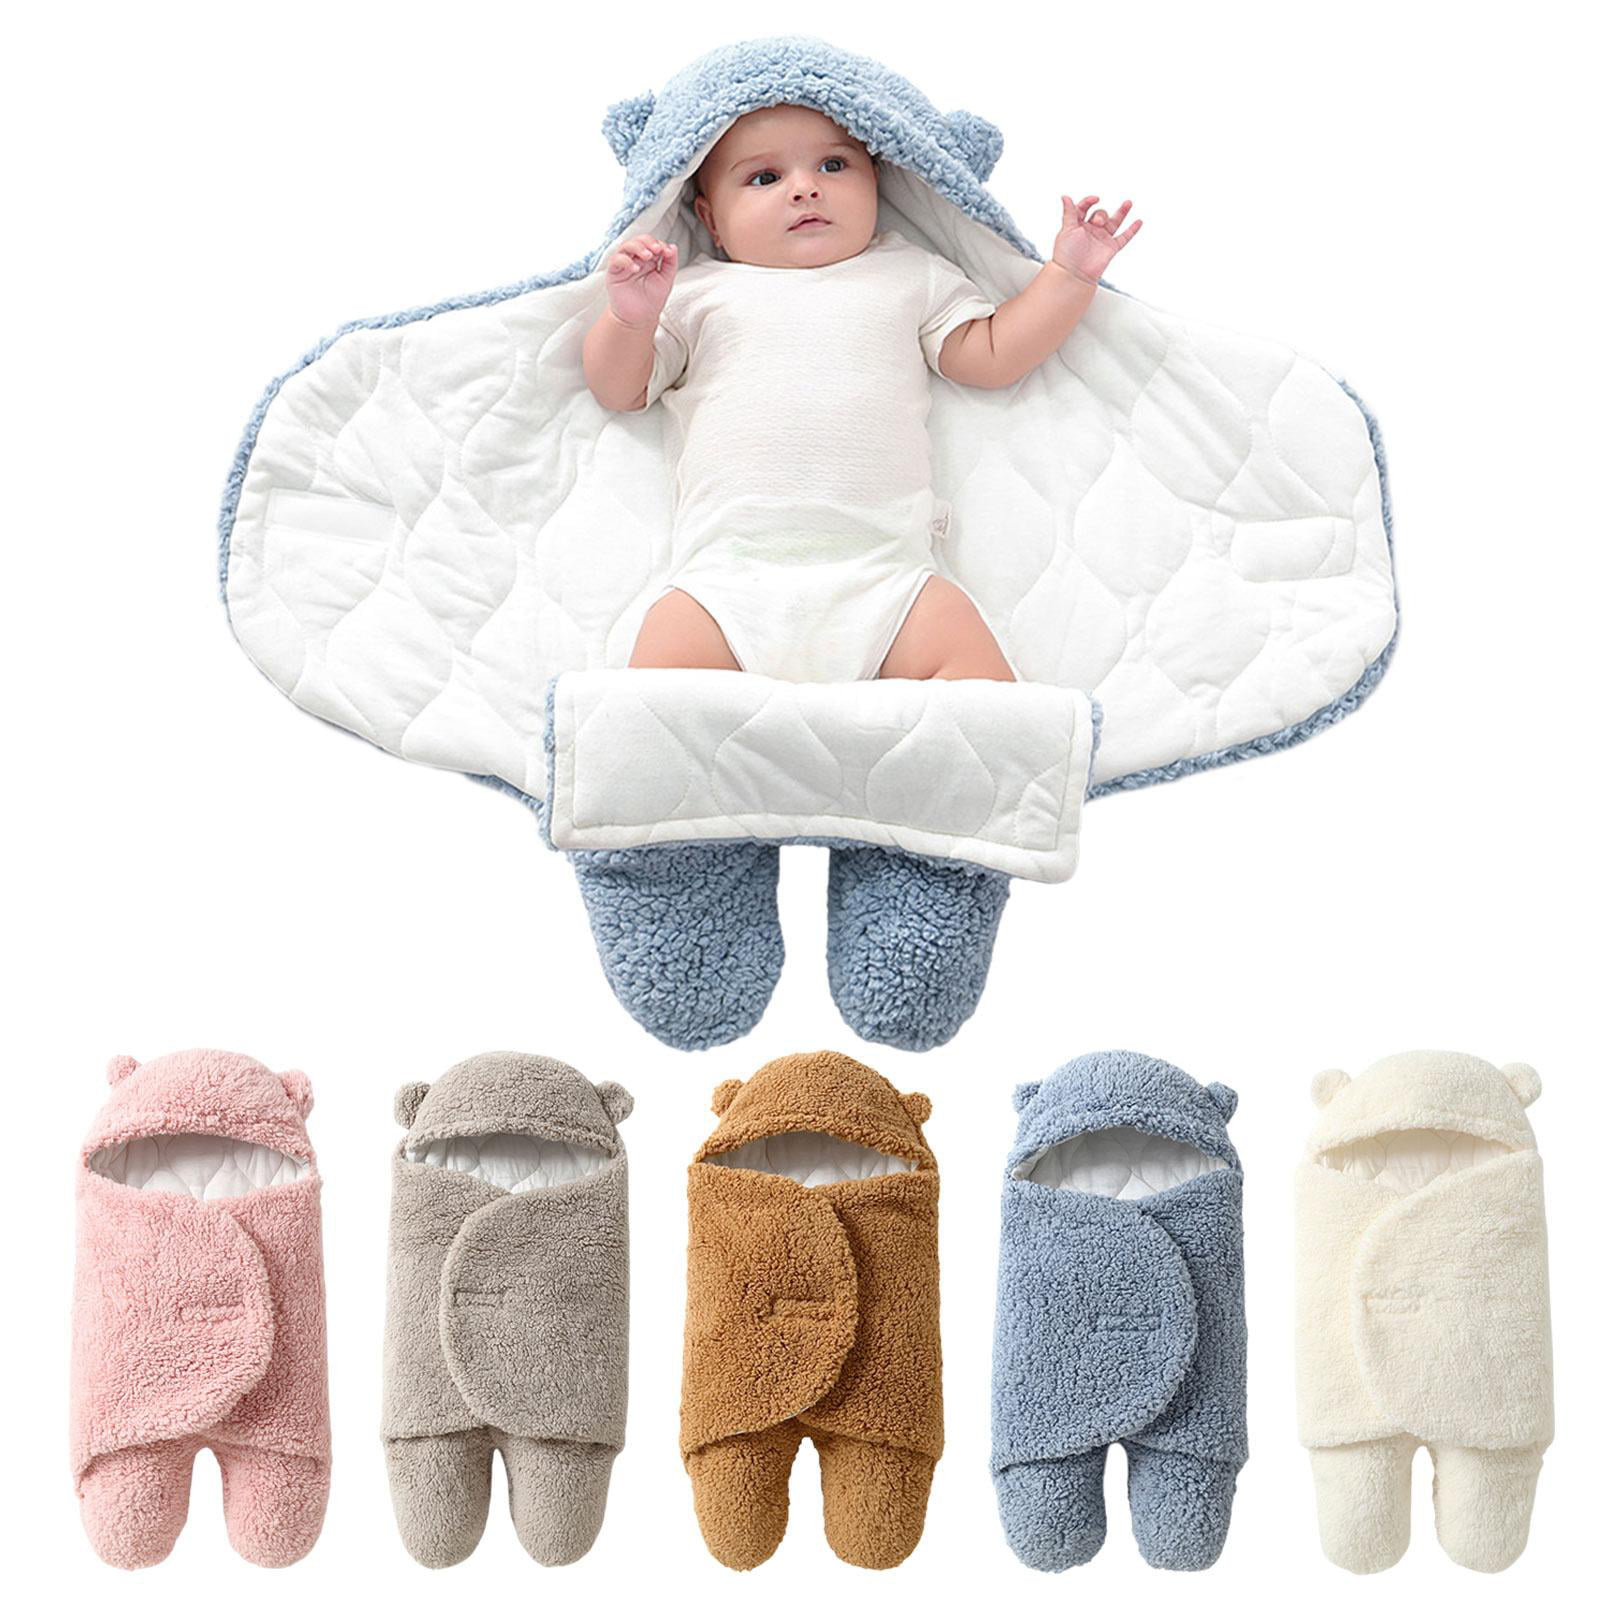 Newborn Baby Swaddle Blanket Wrap Winter Infant Soft Plush Warm Hooded Wrap Sleeping Bag for Infants 3-6 Months Old Baby Girls Boys